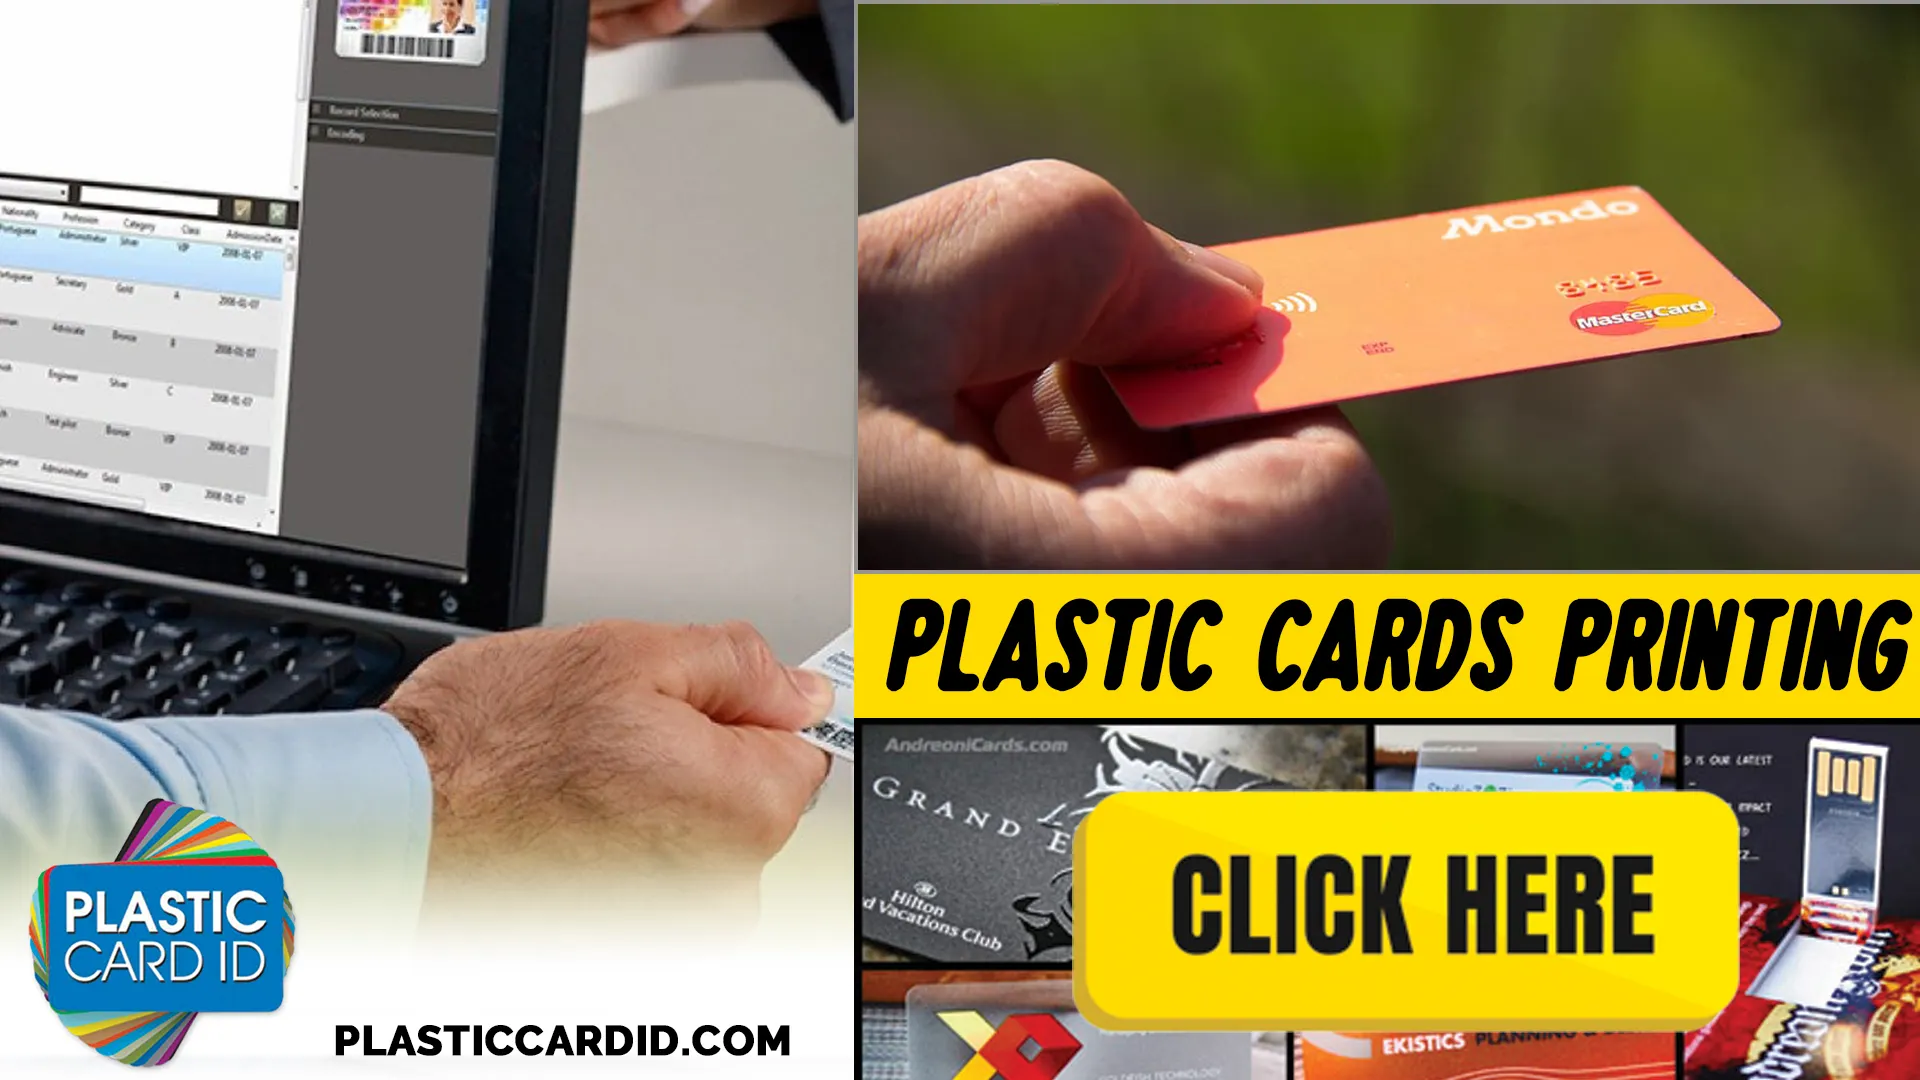 Seamlessly Integrating Brand Identity in Plastic Card Designs